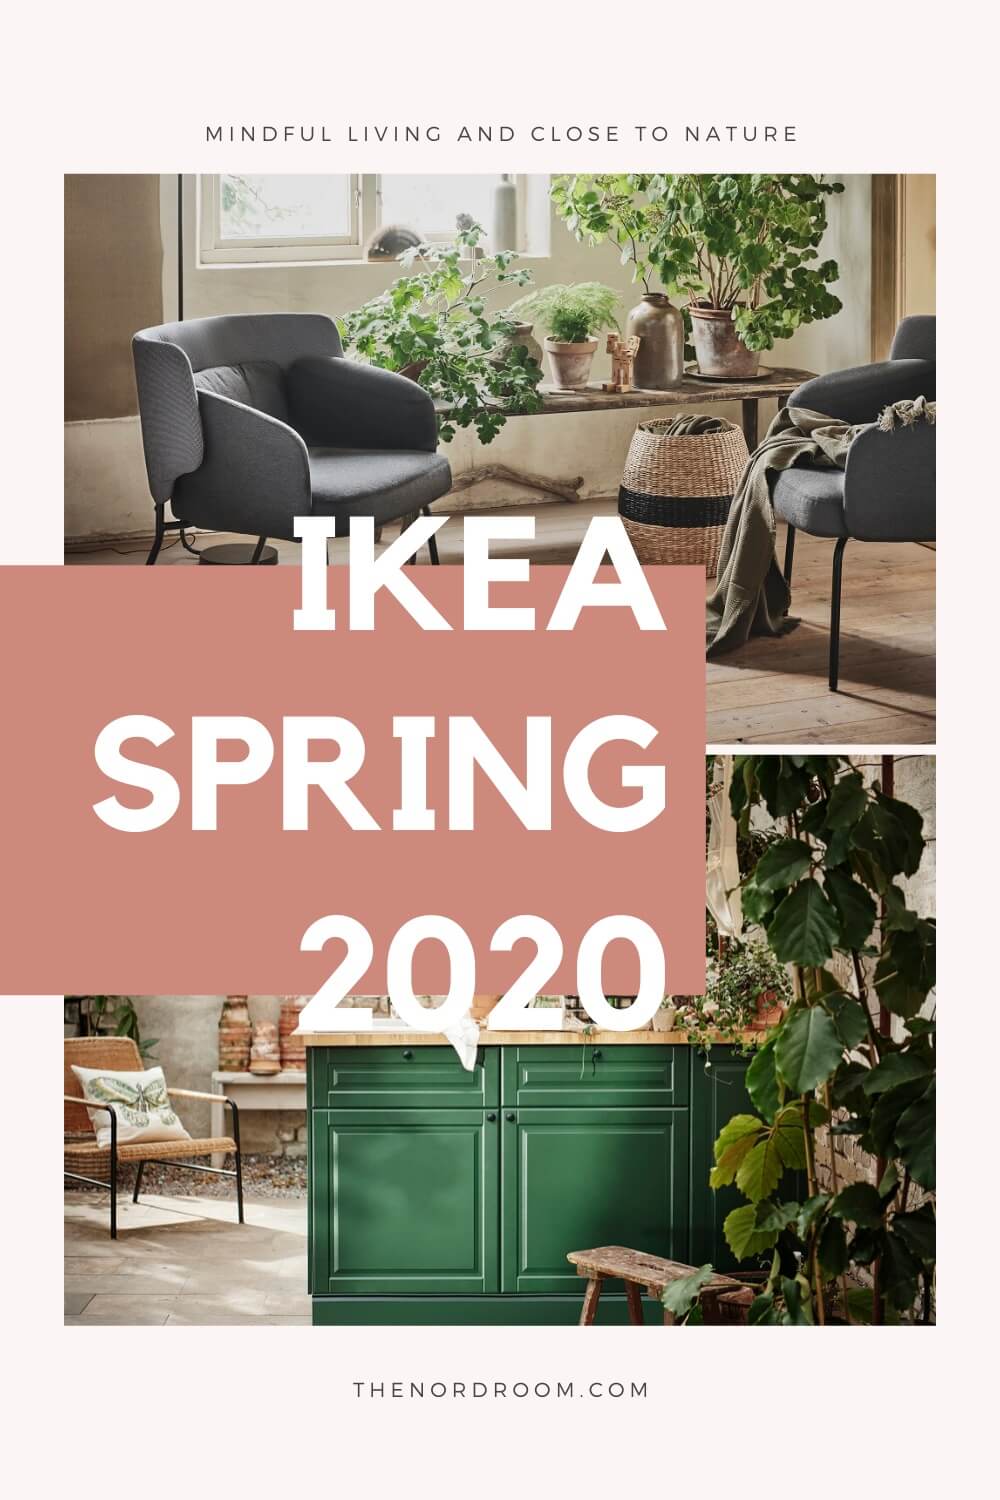 IKEA Spring Collection 2020: Mindful Living and Close to Nature